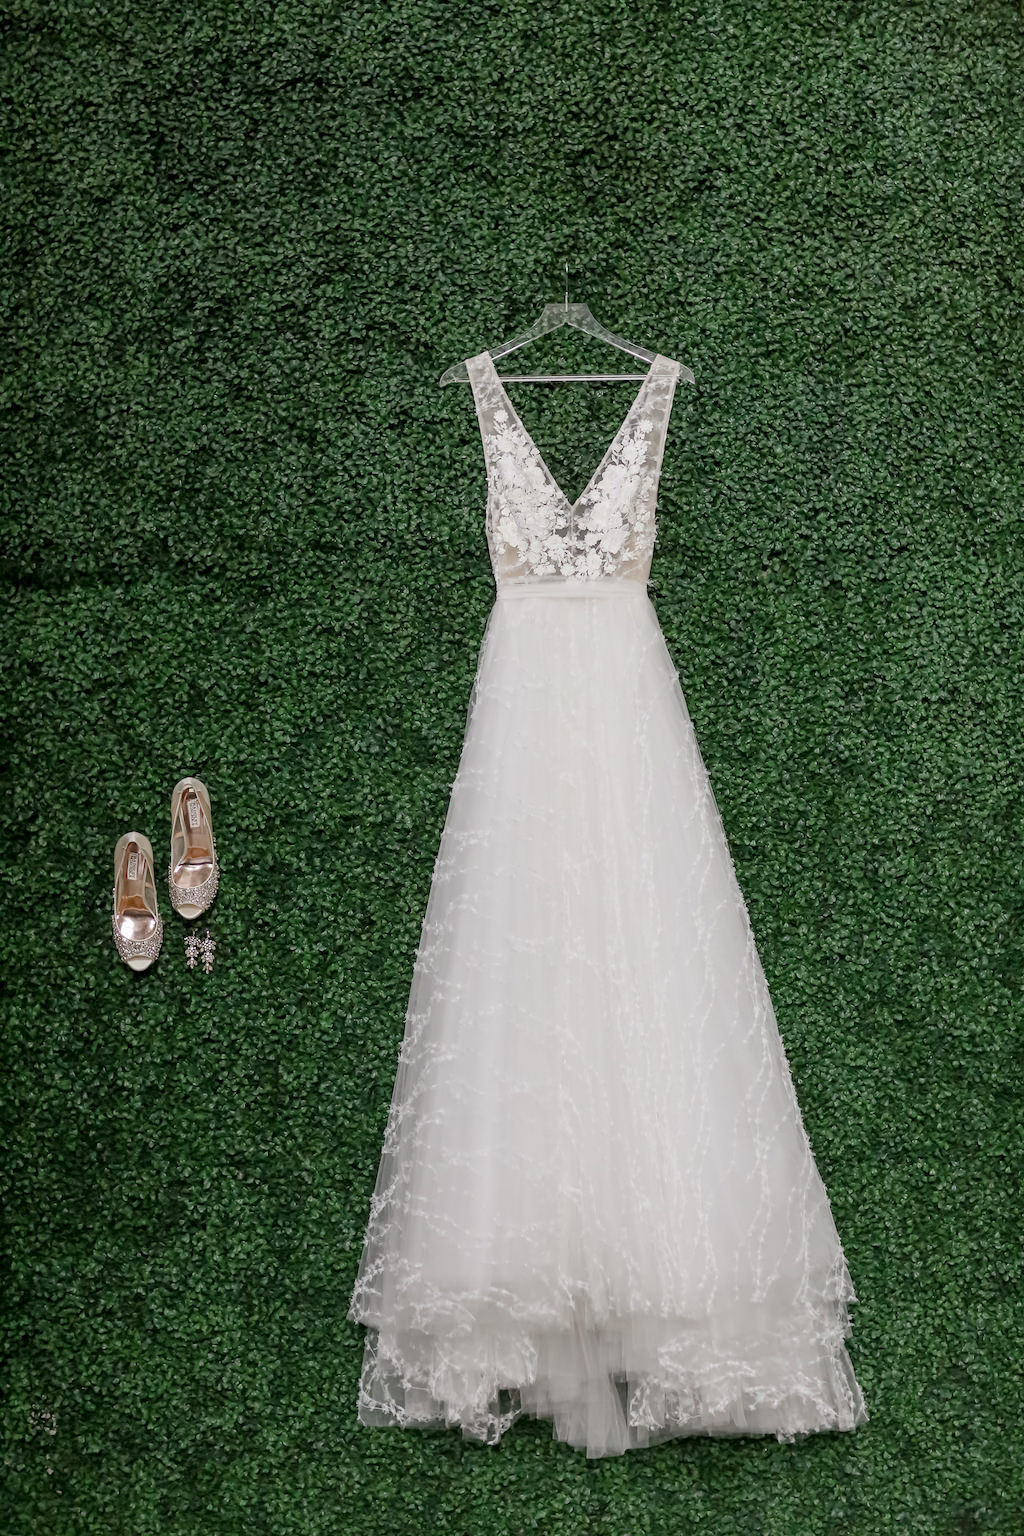 A-Line Illusion Plunging V-Neck Neckline with Tank Top Straps and Floral Lace Appliques Wedding Dress Hanging on Greenery Wall, Wedding Shoes and Earrings | Tampa Bay Photographer Lifelong Photography Studios | Dress Shop The Bride Tampa | Downtown St. Pete Wedding Venue The Birchwood